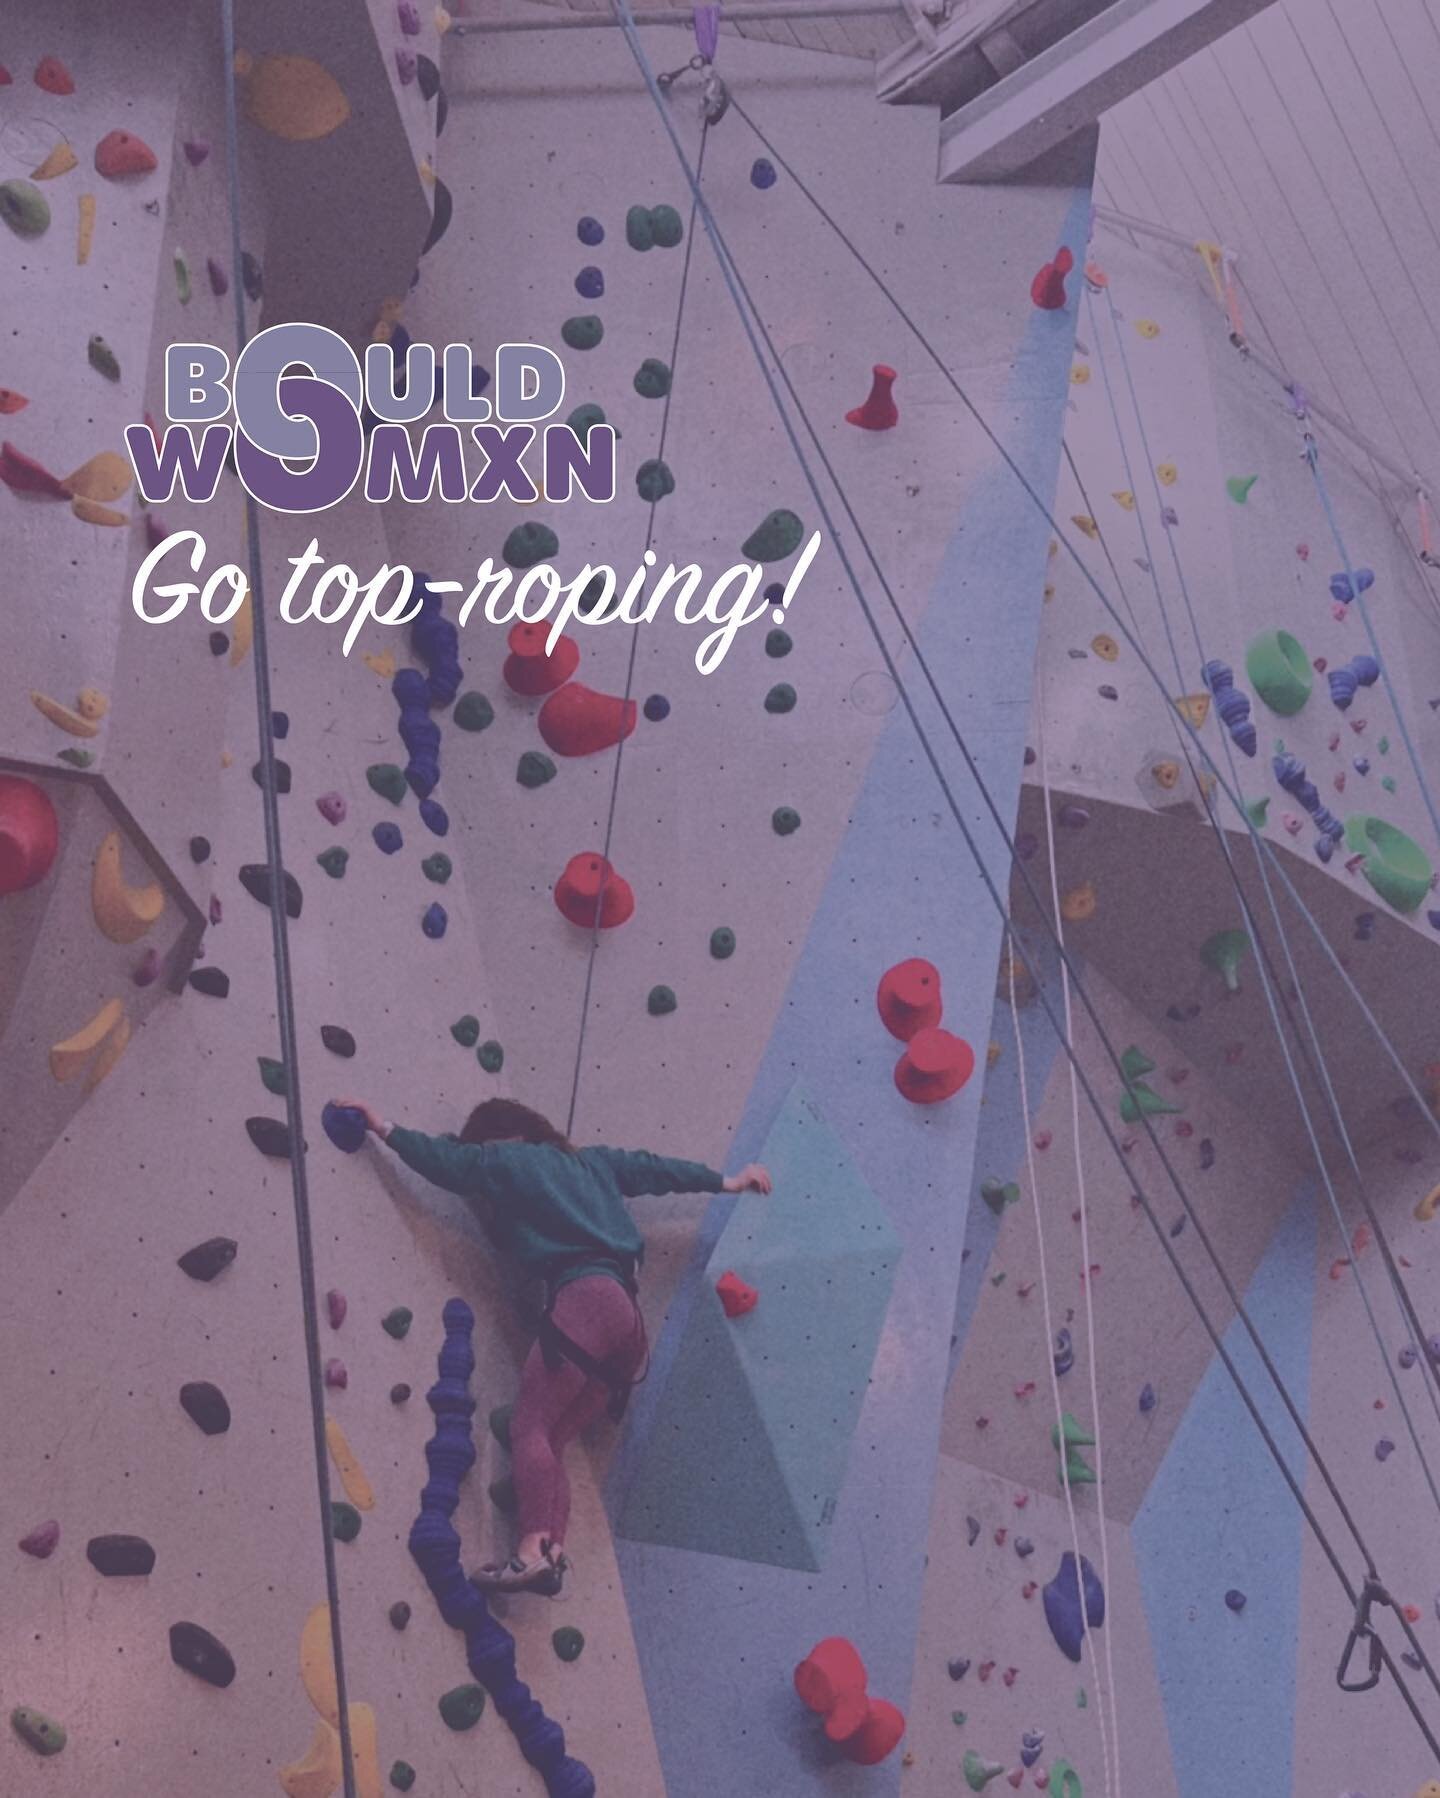 We thought we&rsquo;d mix it up a little this week 🥳
Our Bould Womxn Climbing session is taking to the top-ropes this week, with coach Olive! Come along for some good hangs and some sweet beta 😍
Beginner friendly!